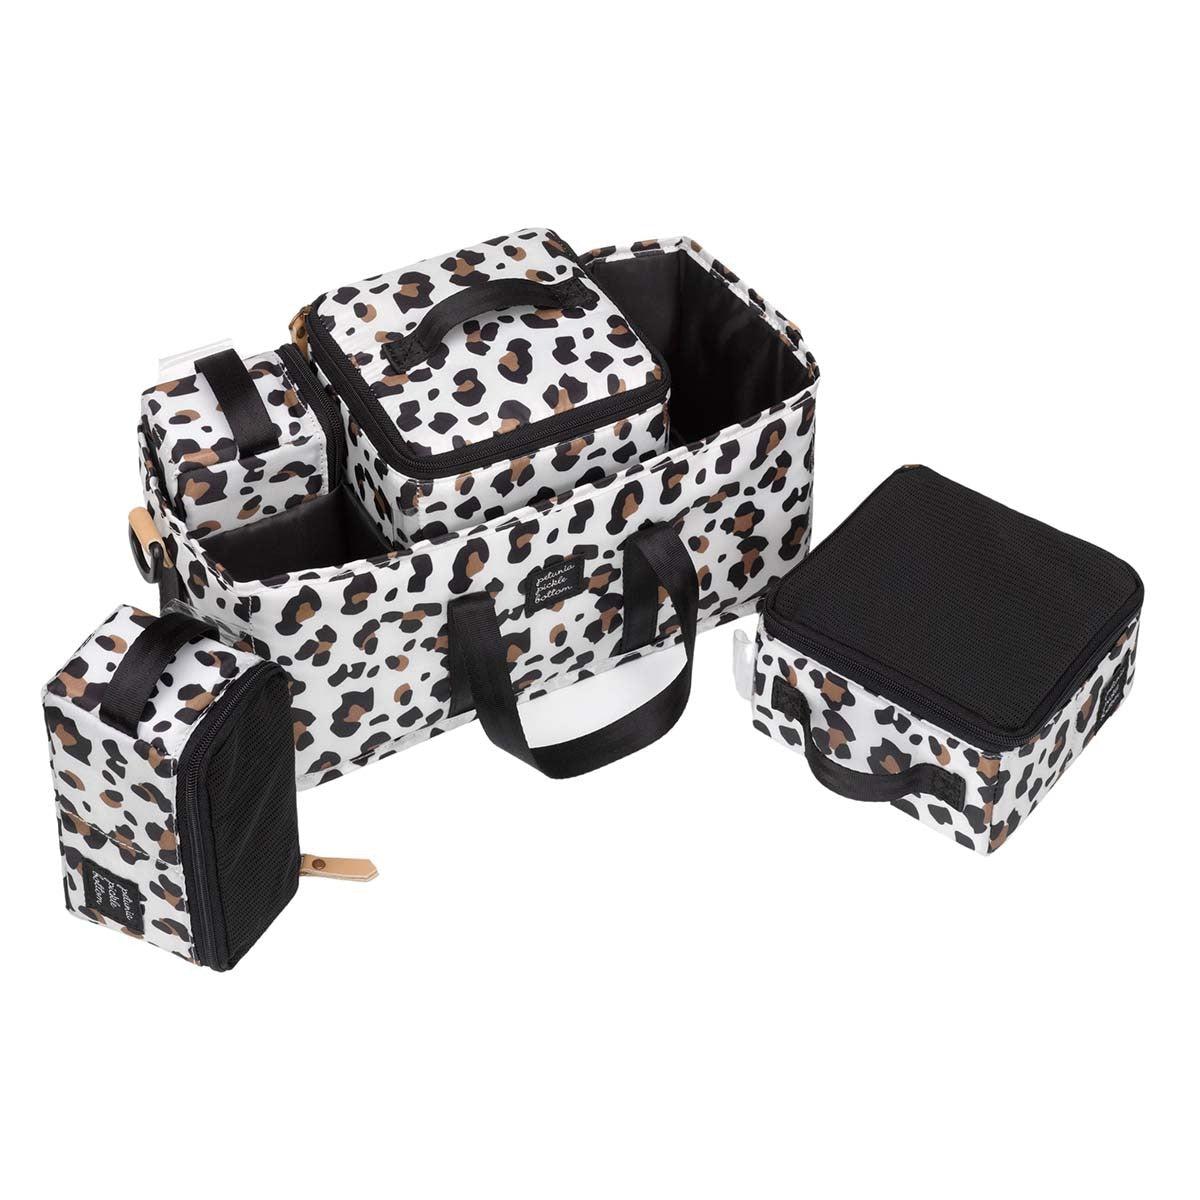 Petunia Pickle Bottom Inter-Mix Deluxe Kit in Moon Leopard Diaper Caddie